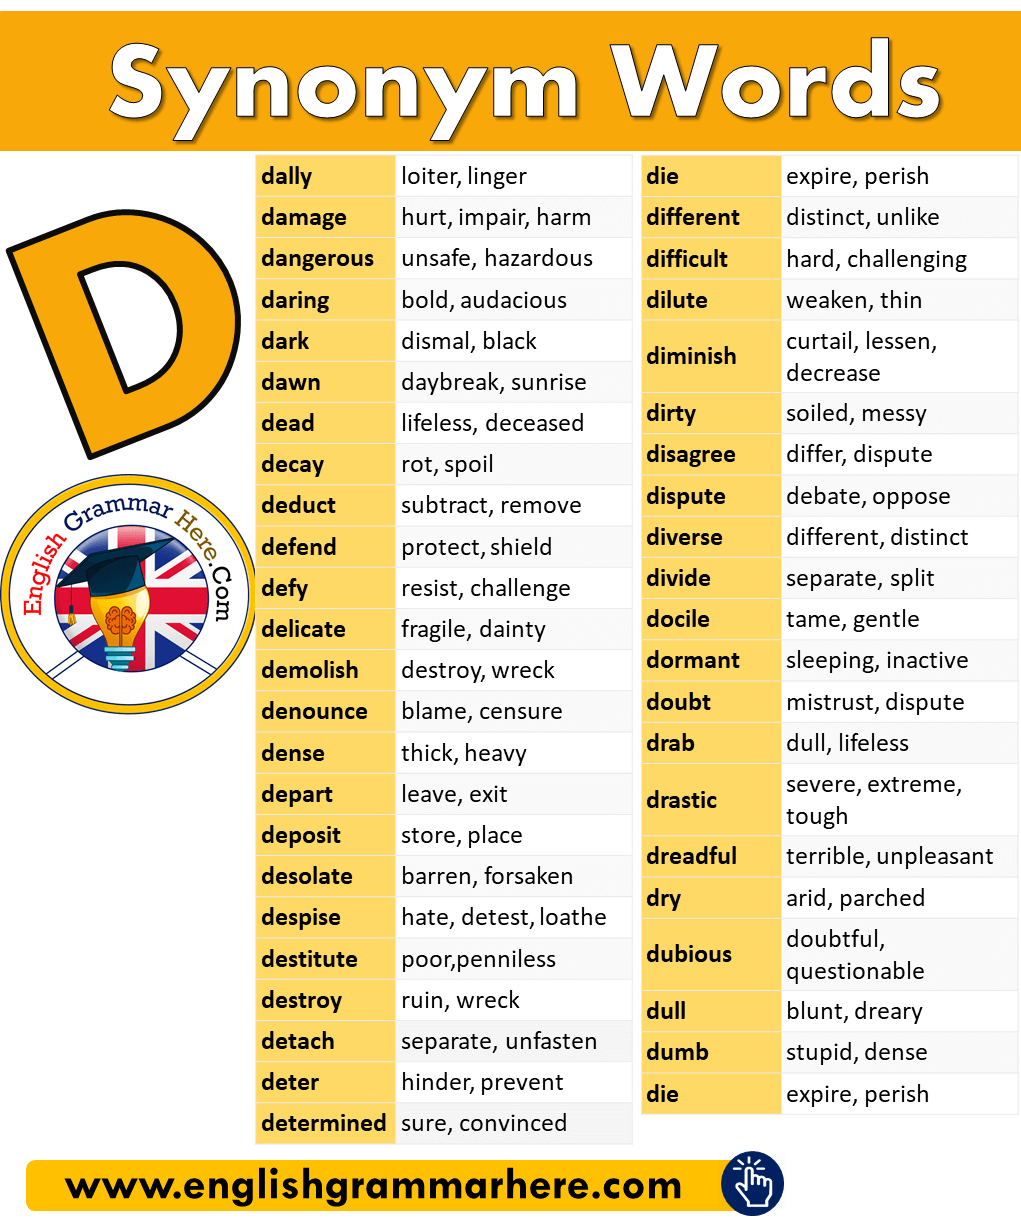 Synonym Words with D in English - English Grammar Here